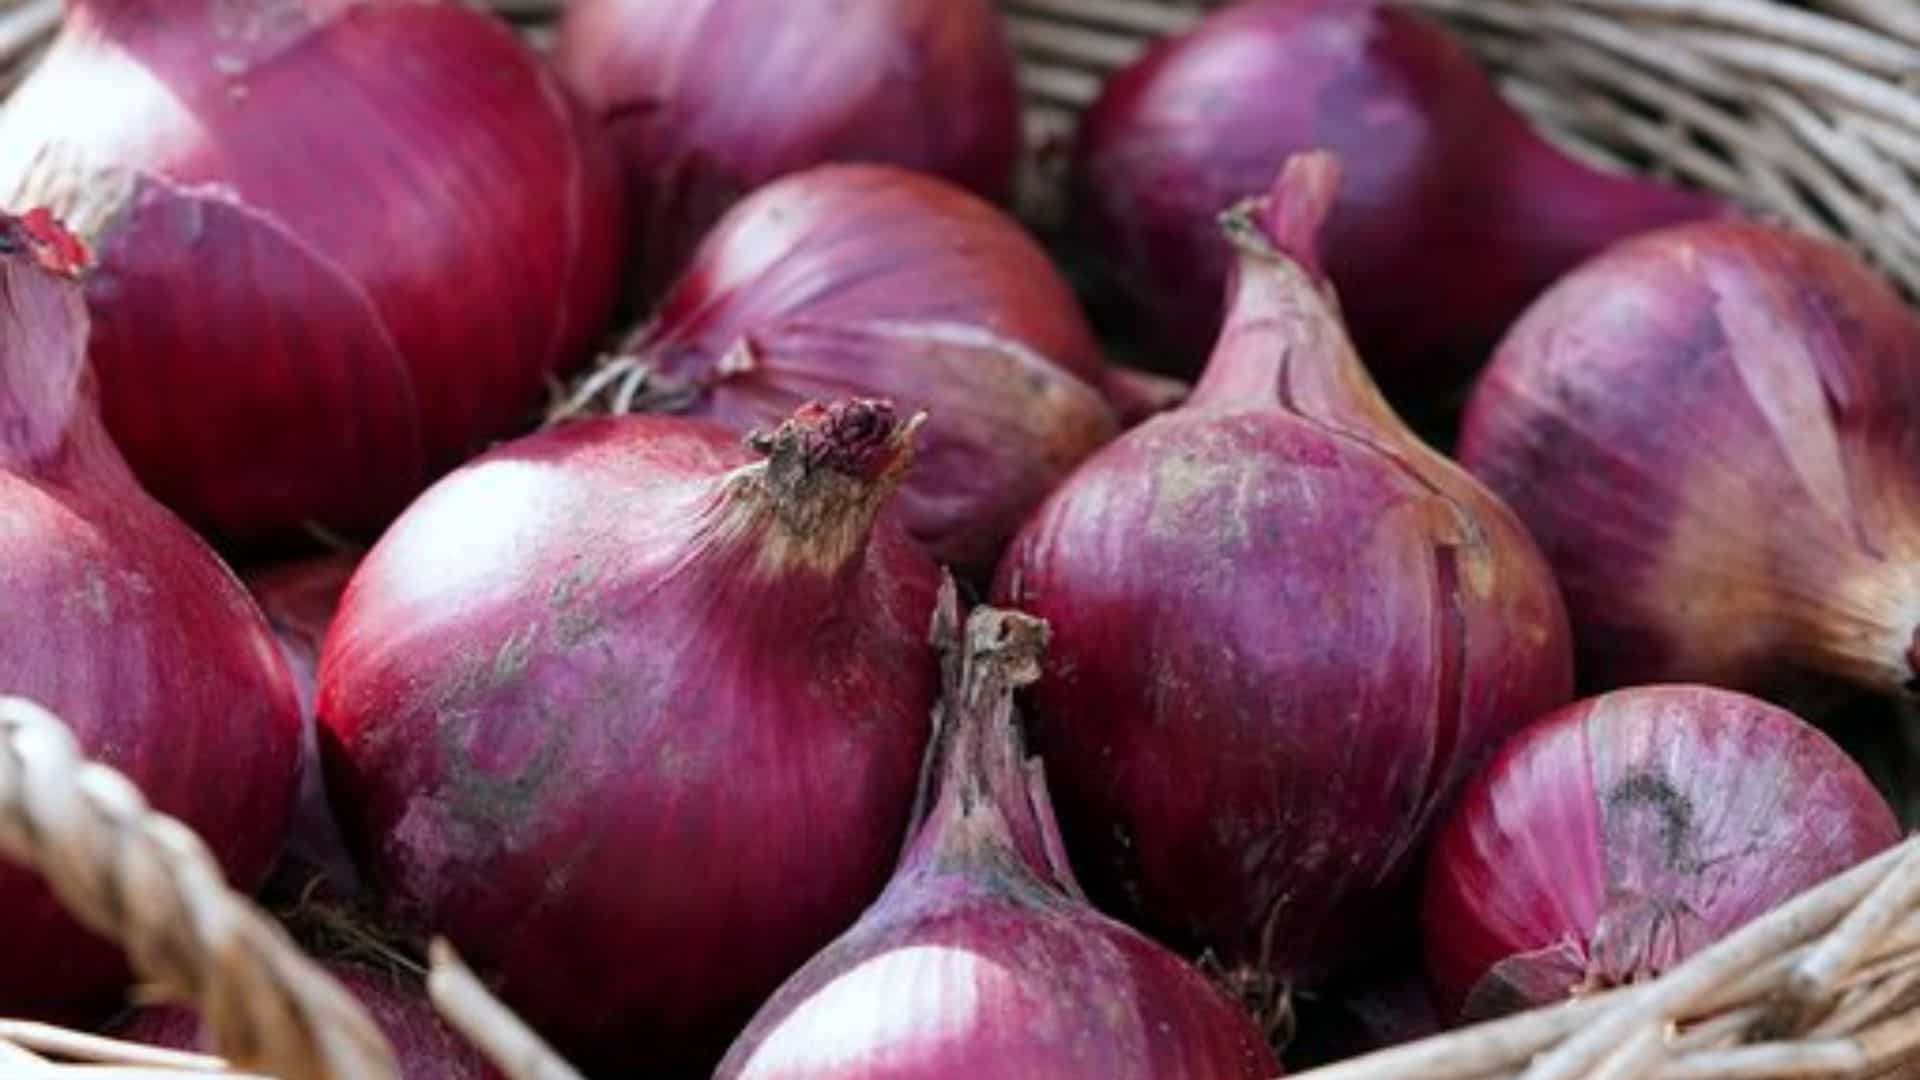 India’s export tax on Onions would possibly well lead to rate hike in world markets